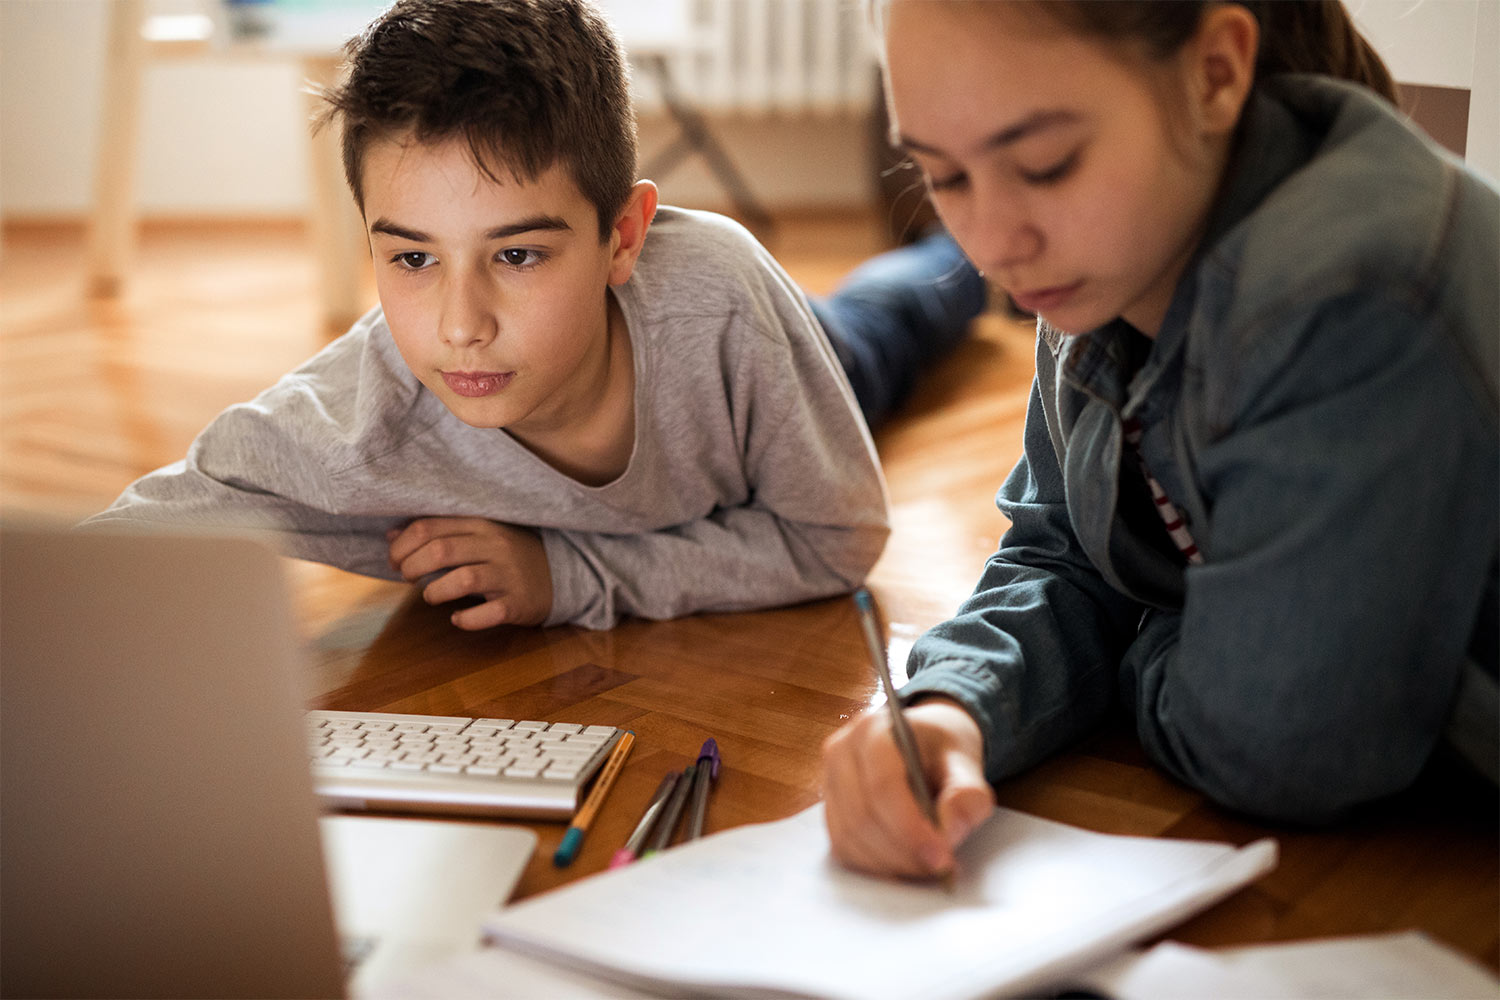 Students working from home under Family Educational Rights and Privacy Act